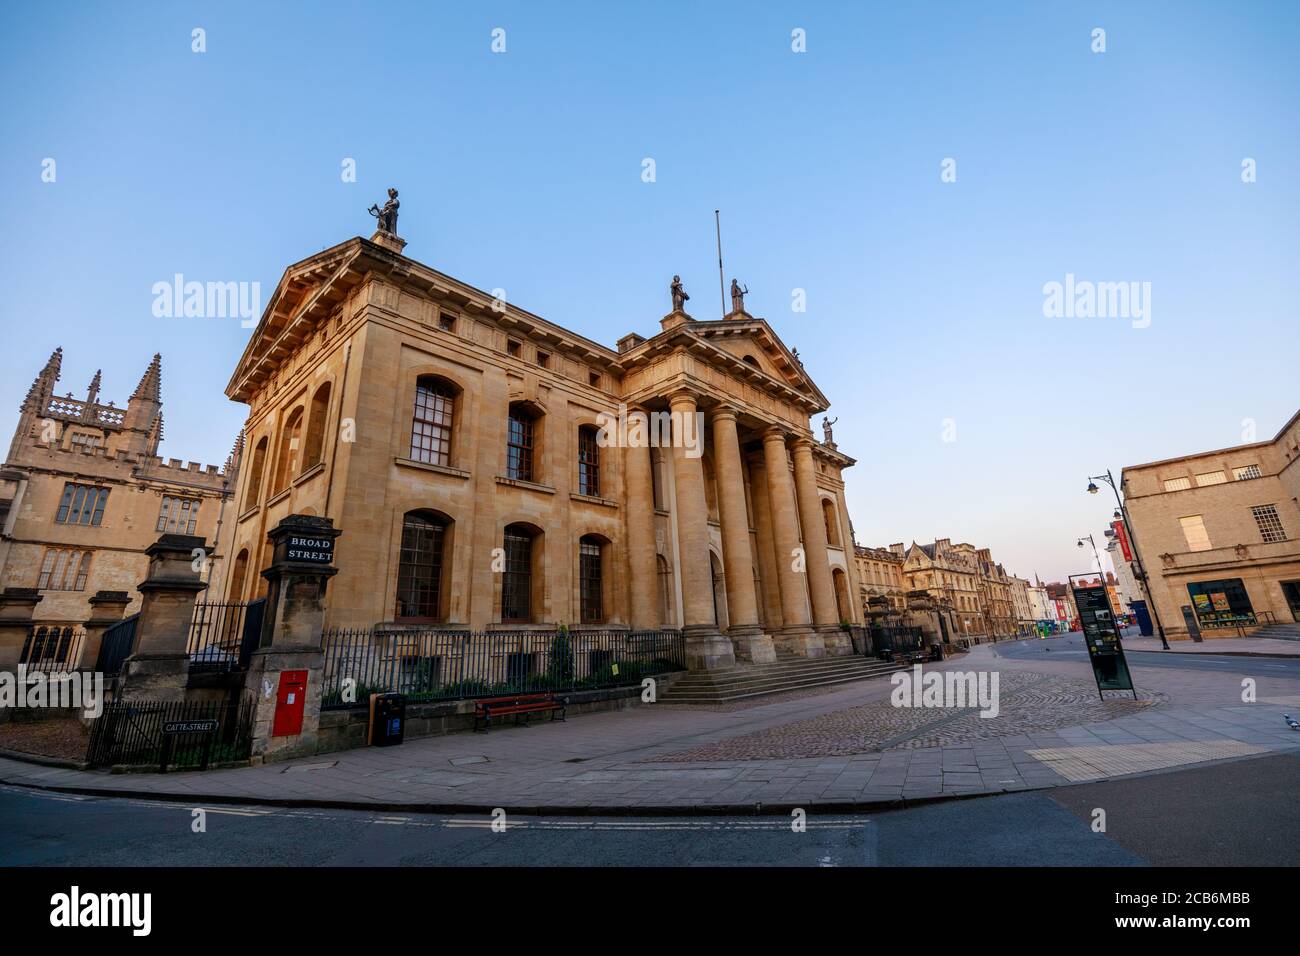 The Clarendon Building and Broad Street in Oxford with no people. Early in the morning. Oxford, England, UK. Stock Photo